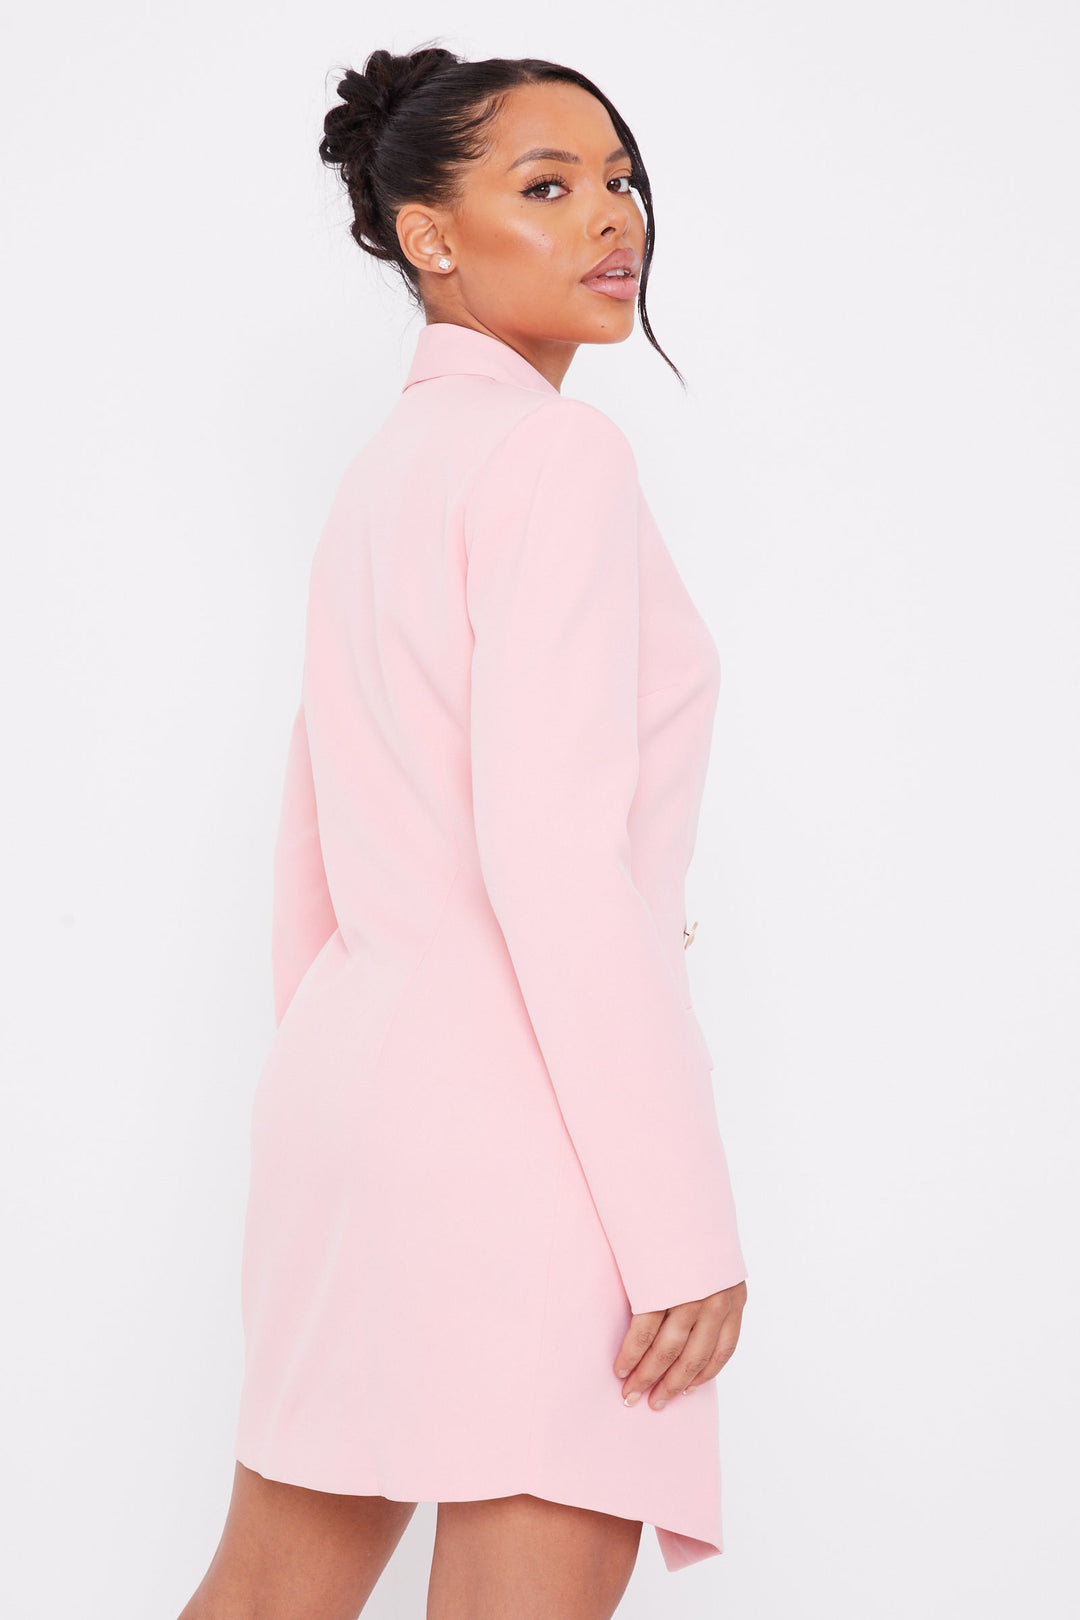 Pink Double Breasted Gold Button Blazer Dress